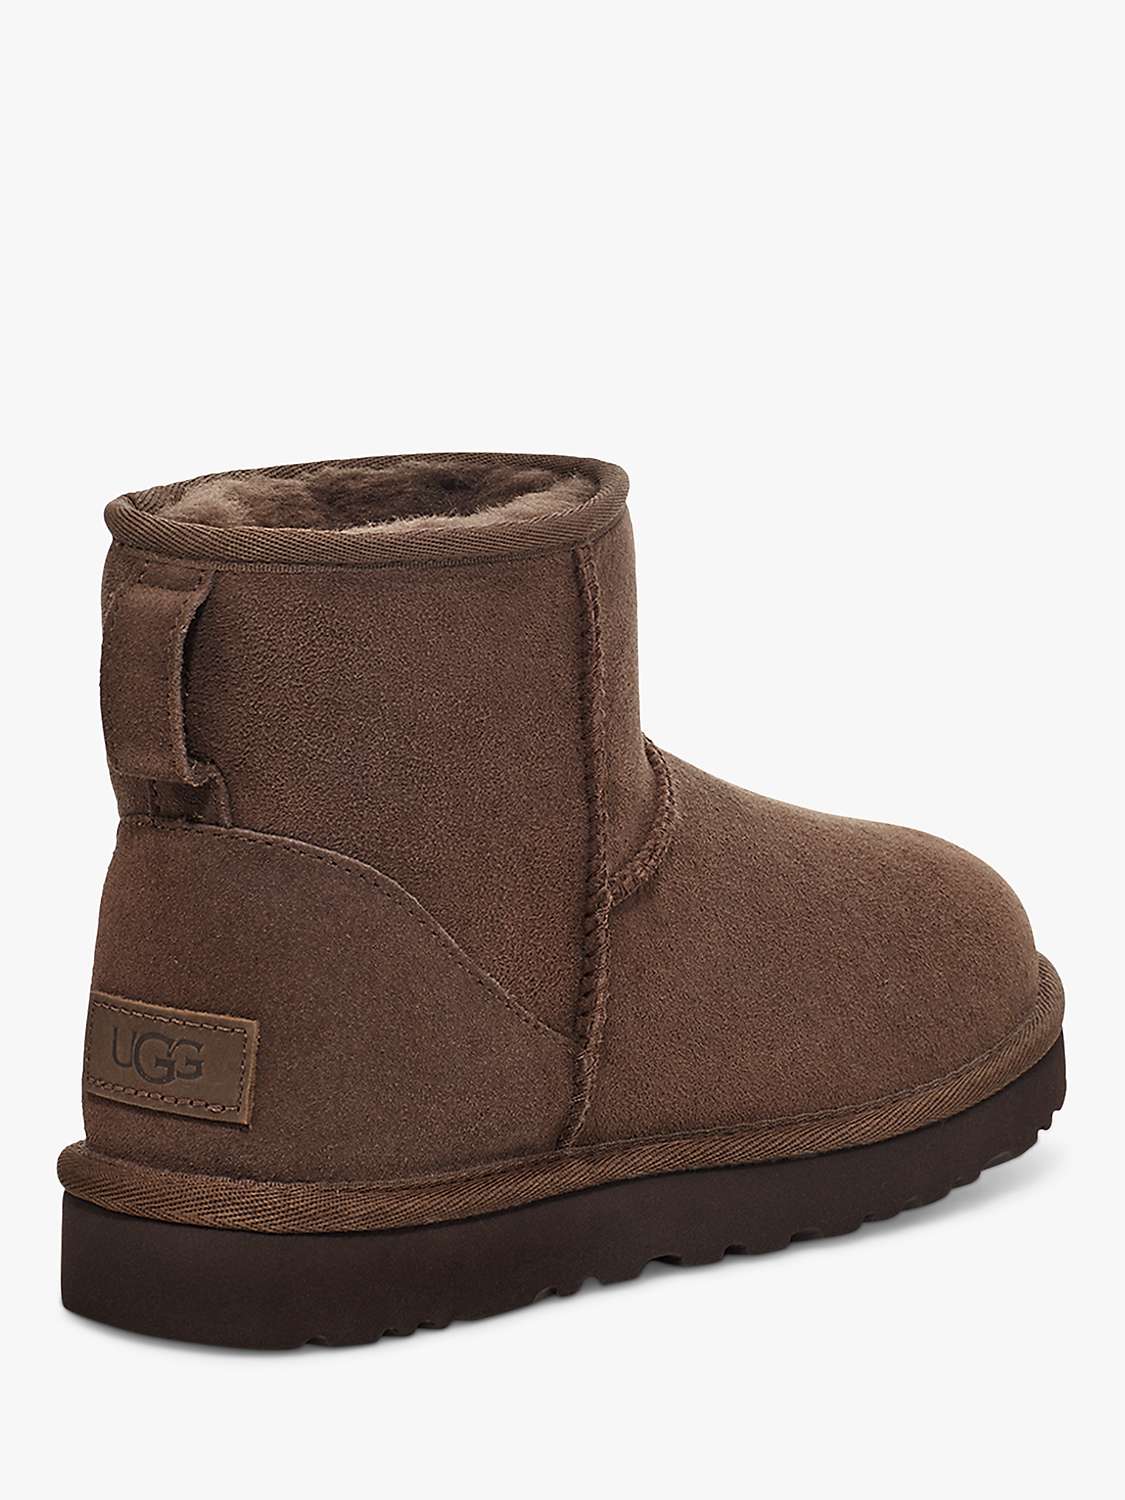 Buy UGG Classic Mini Short Leather Boots Online at johnlewis.com